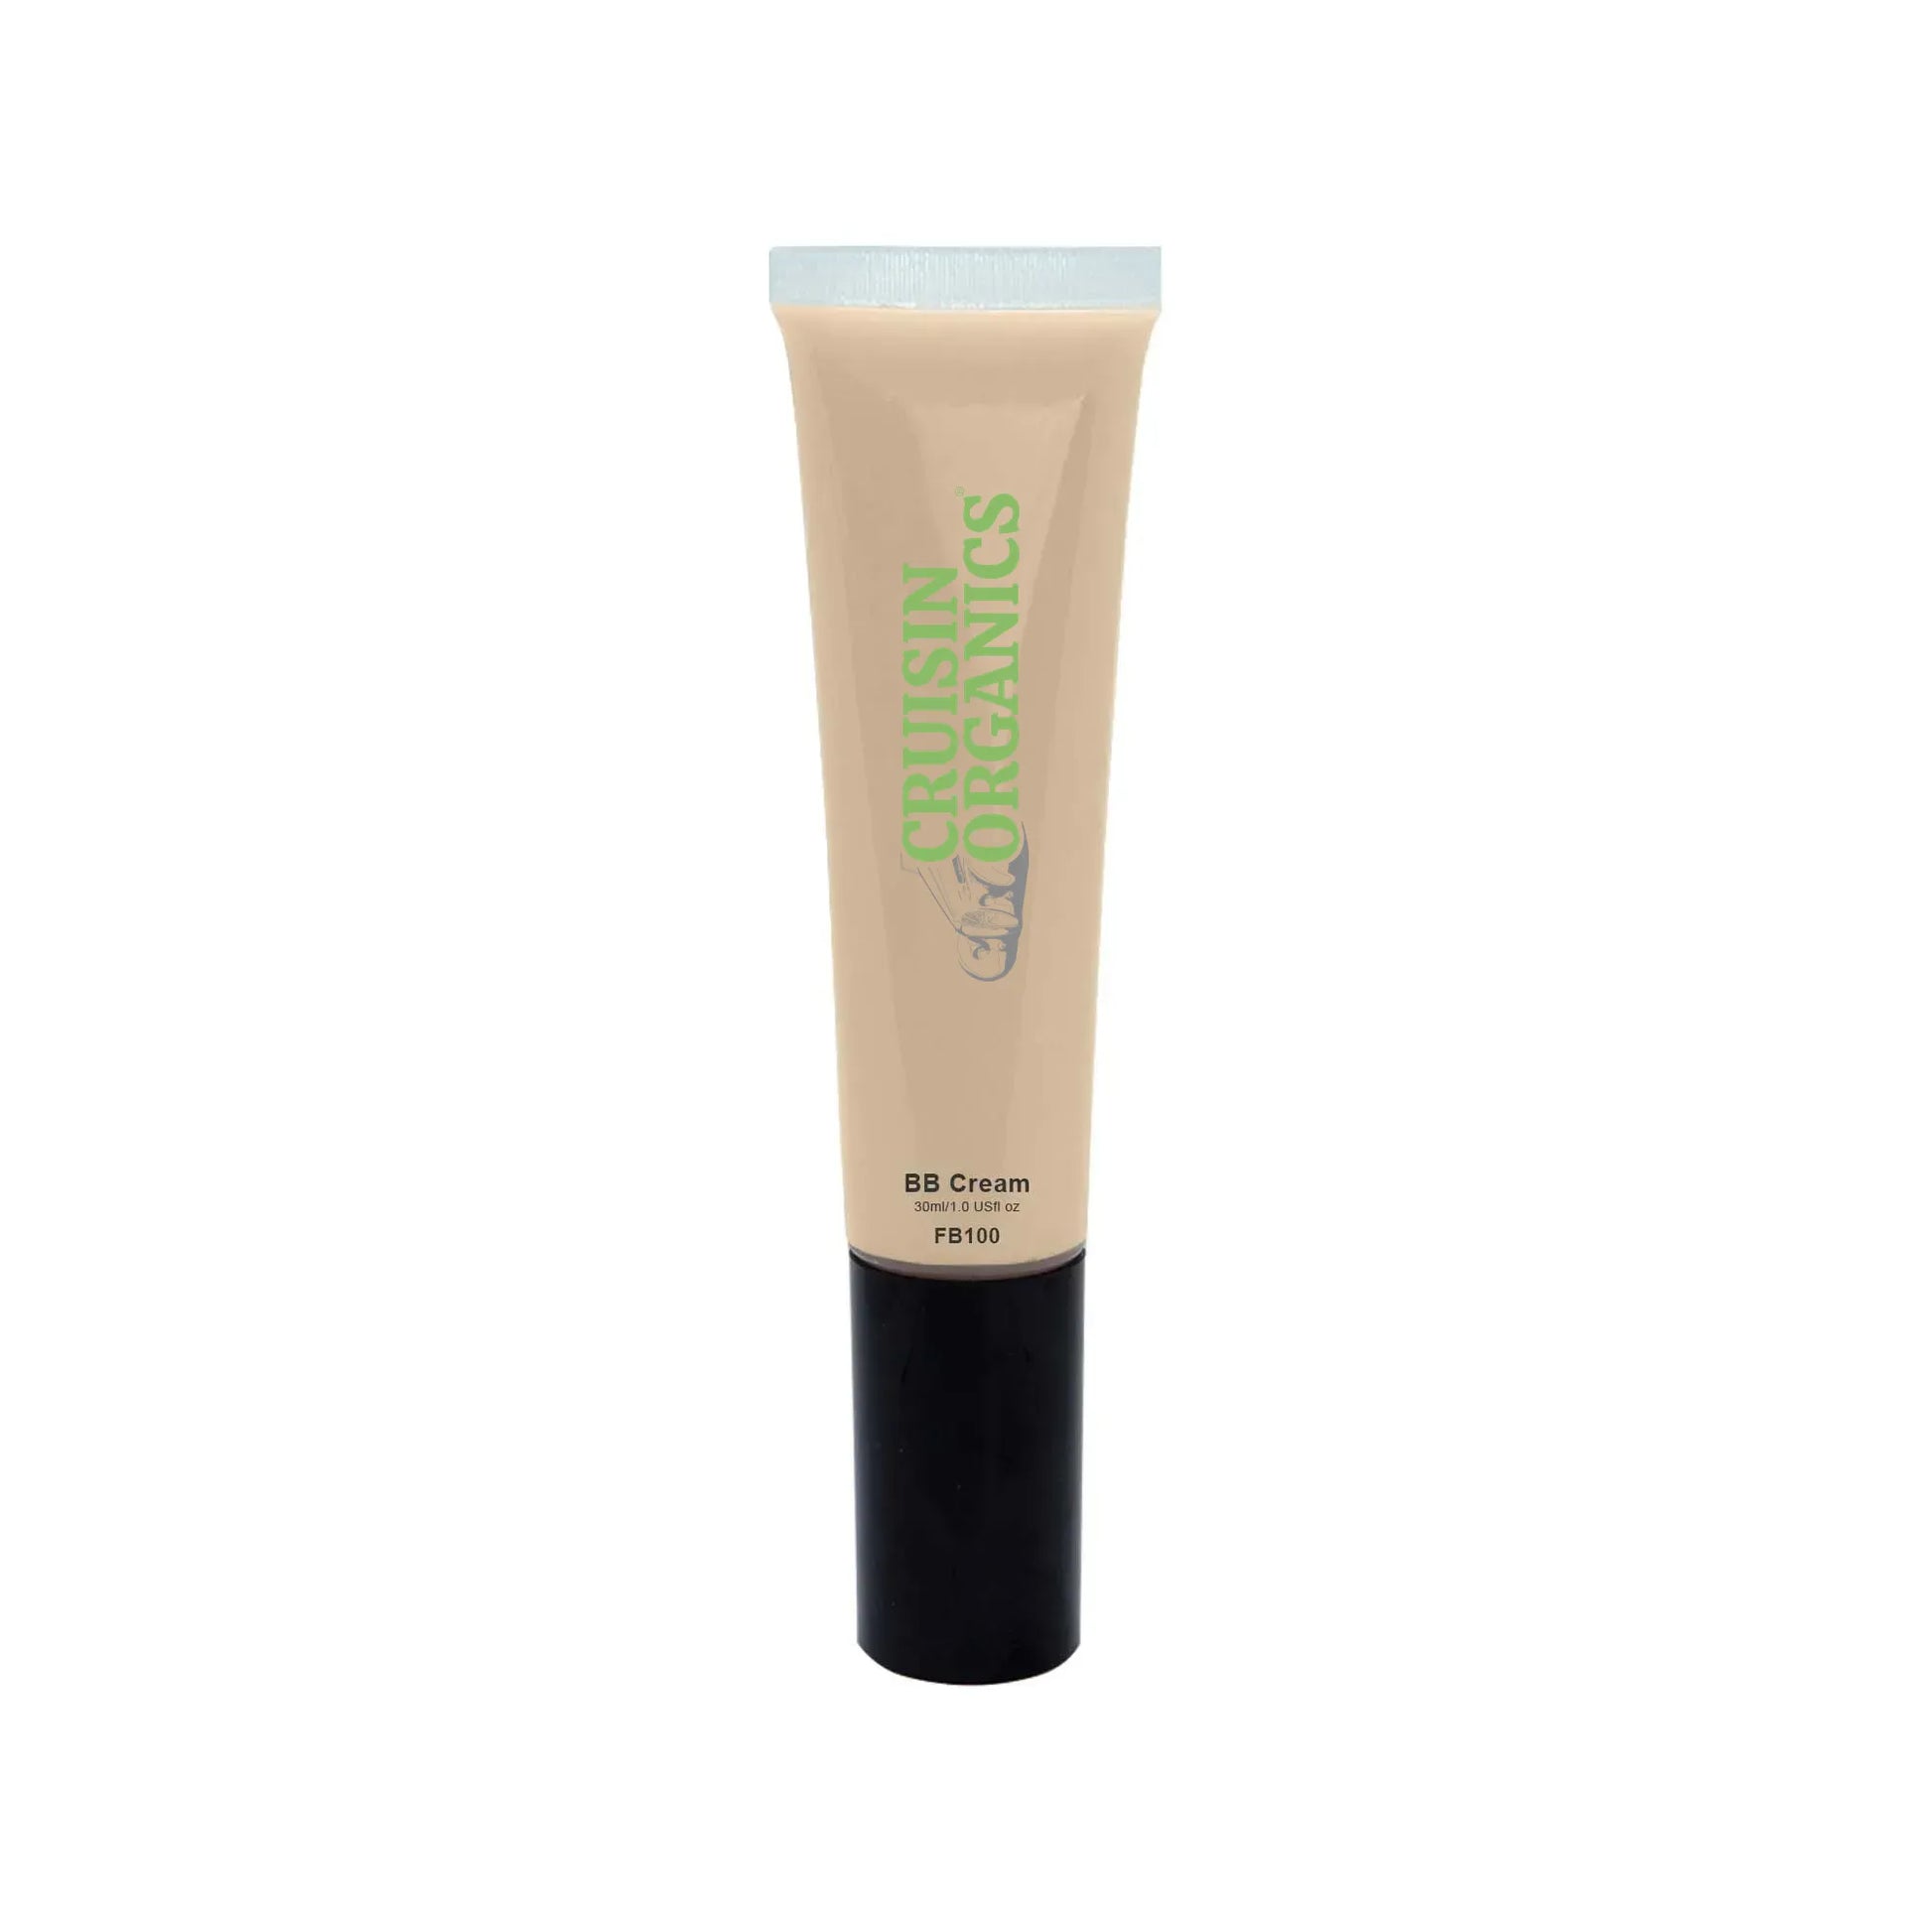 Cruisin Organics Wheat BB Cream. This medium tint cream, with its SPF 18 to revivify skin, renourish from harmful rays. Revive with multiple invigorating ingredients, restrengthening your bare face with this multi-super purposeful cream.